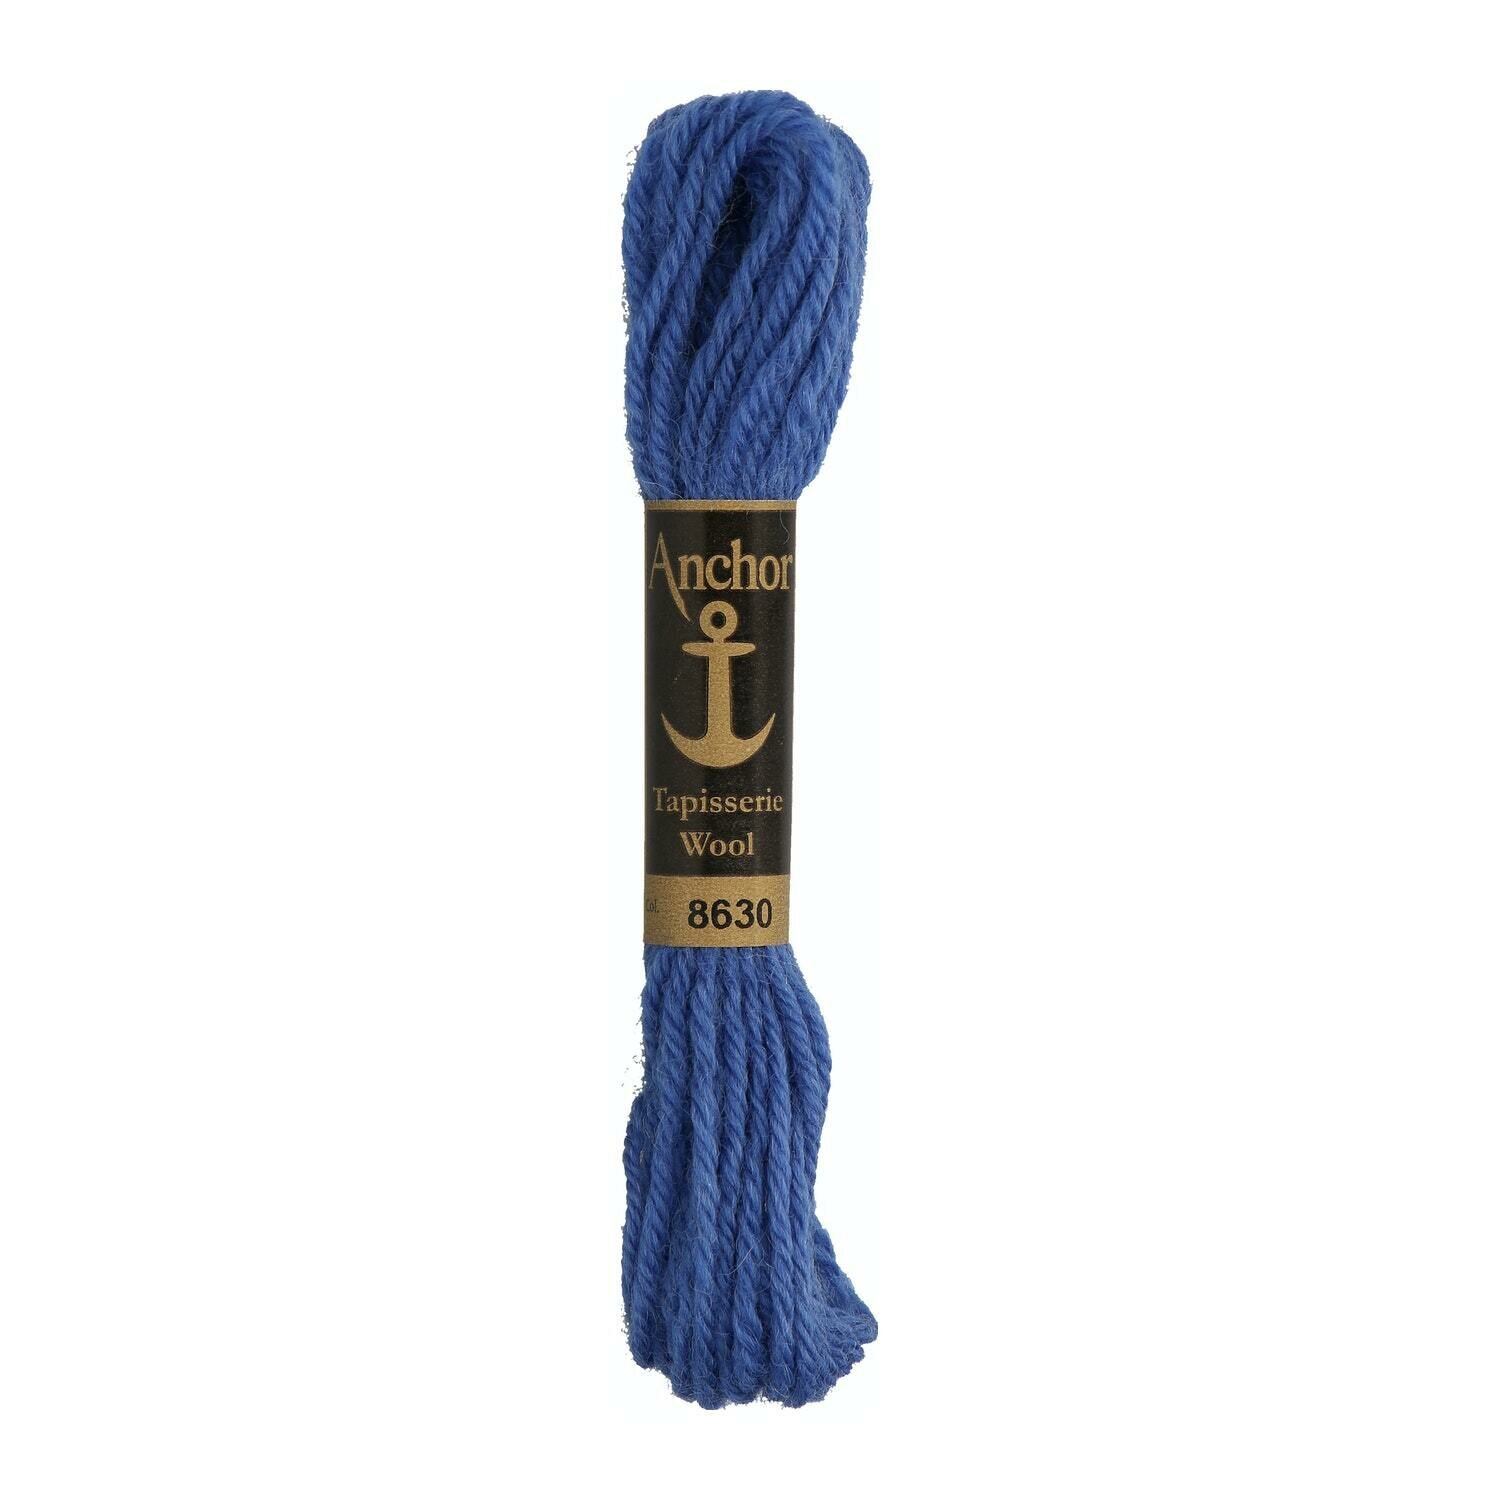 Anchor Tapisserie Wool # 08630